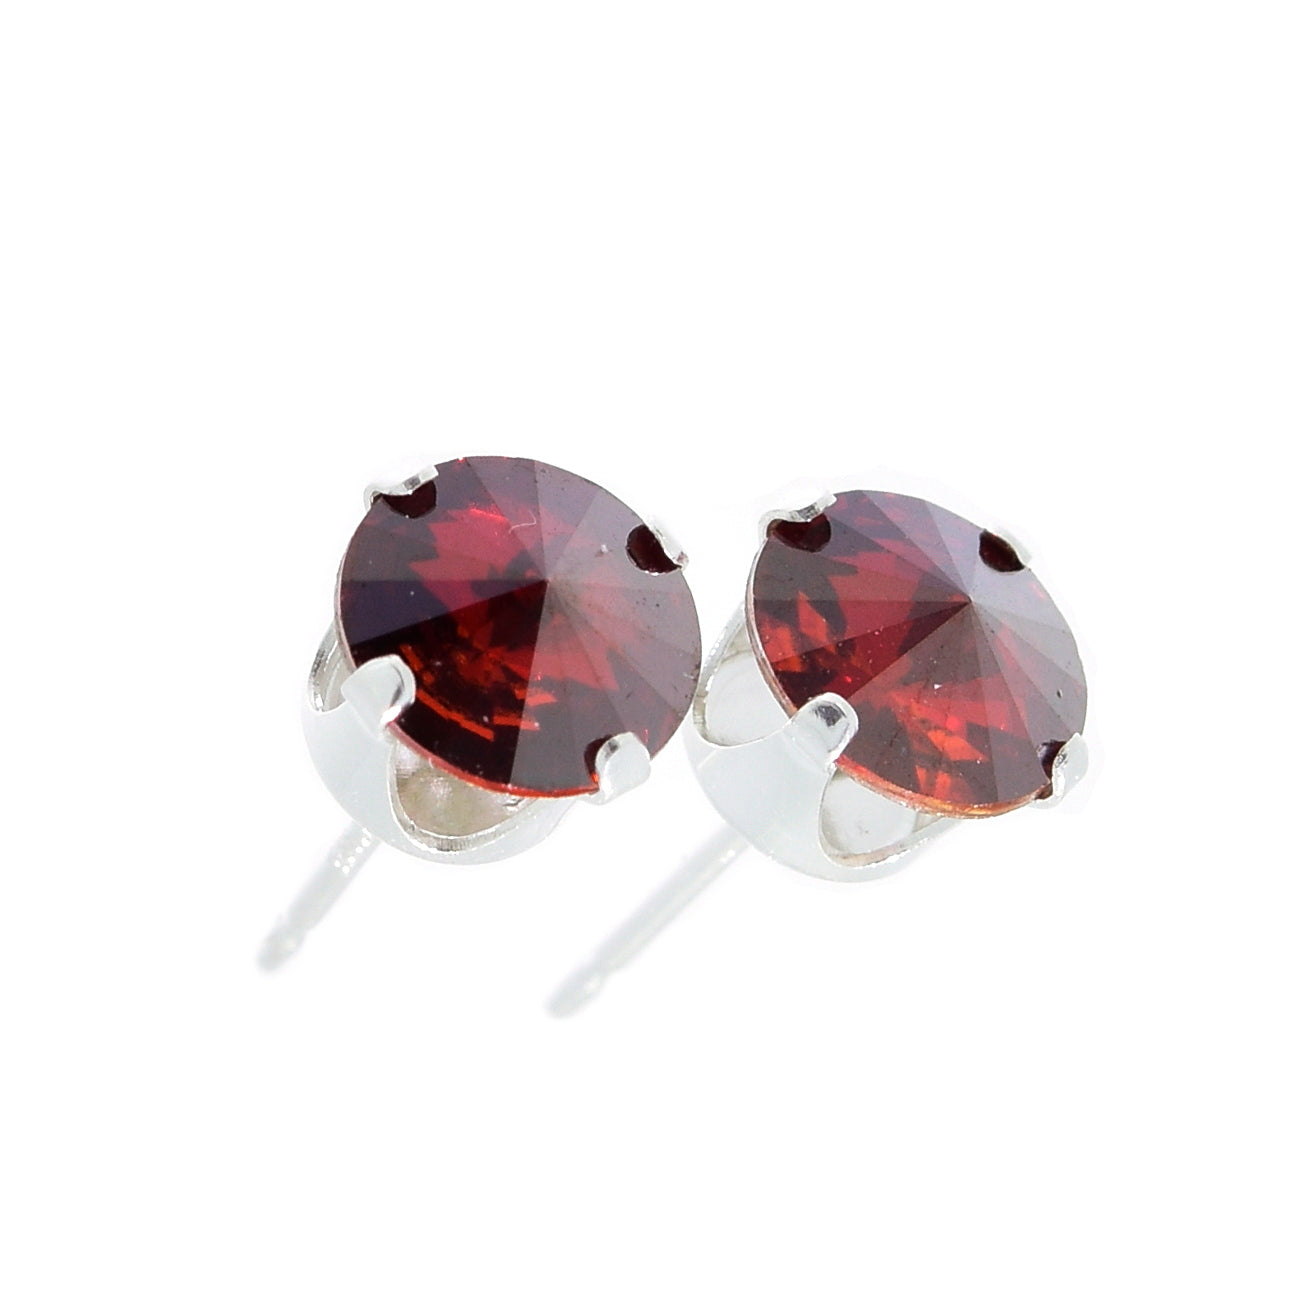 pewterhooter® Women's Classic Collection 925 Sterling silver earrings with brilliant Red Magma crystals, packaged in a gift box for any occasion.